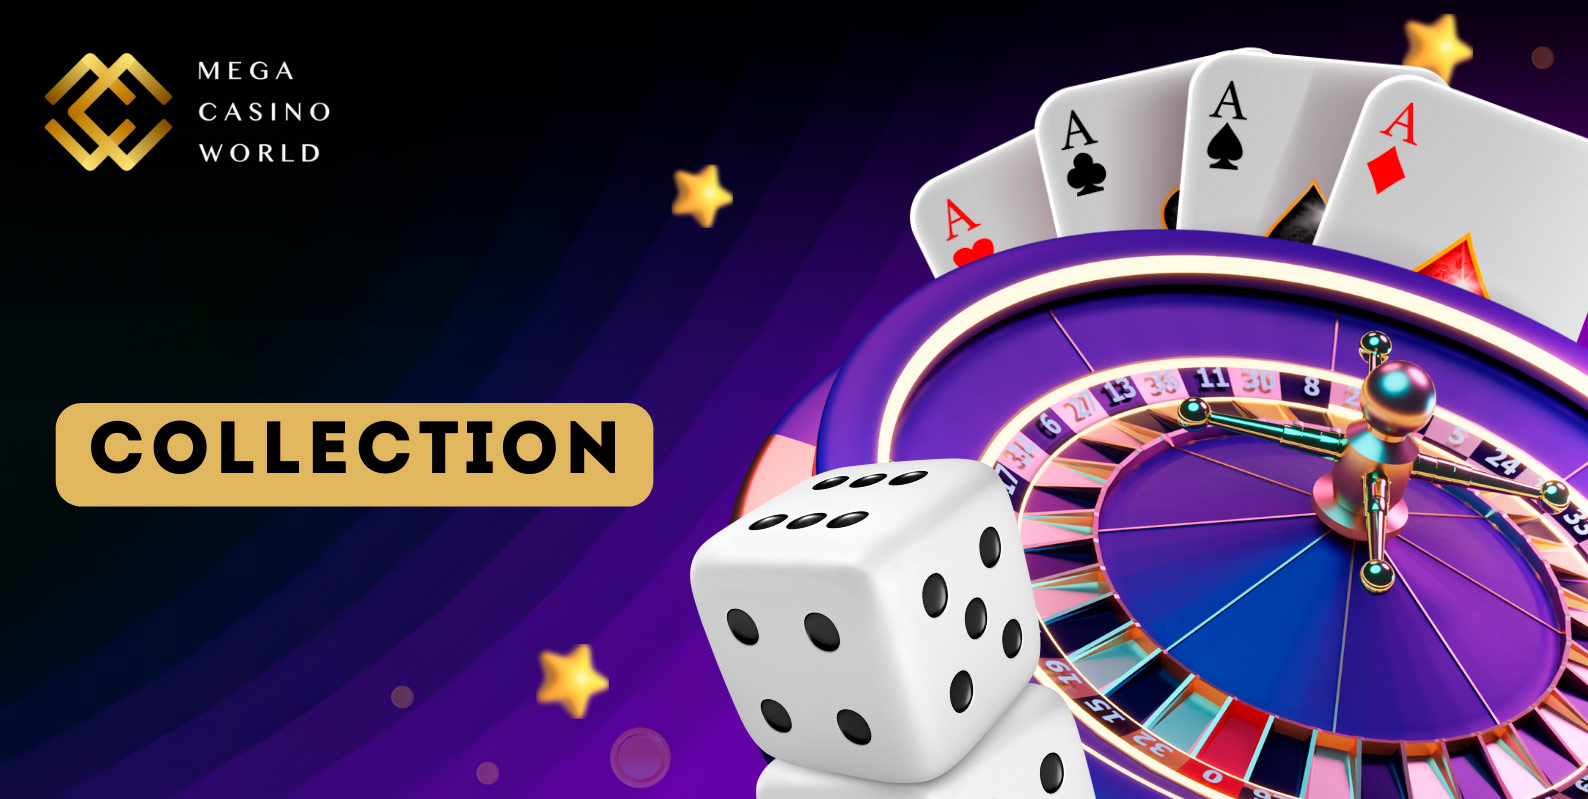 Discover the Exciting Live Casino Collection at MCW Casino